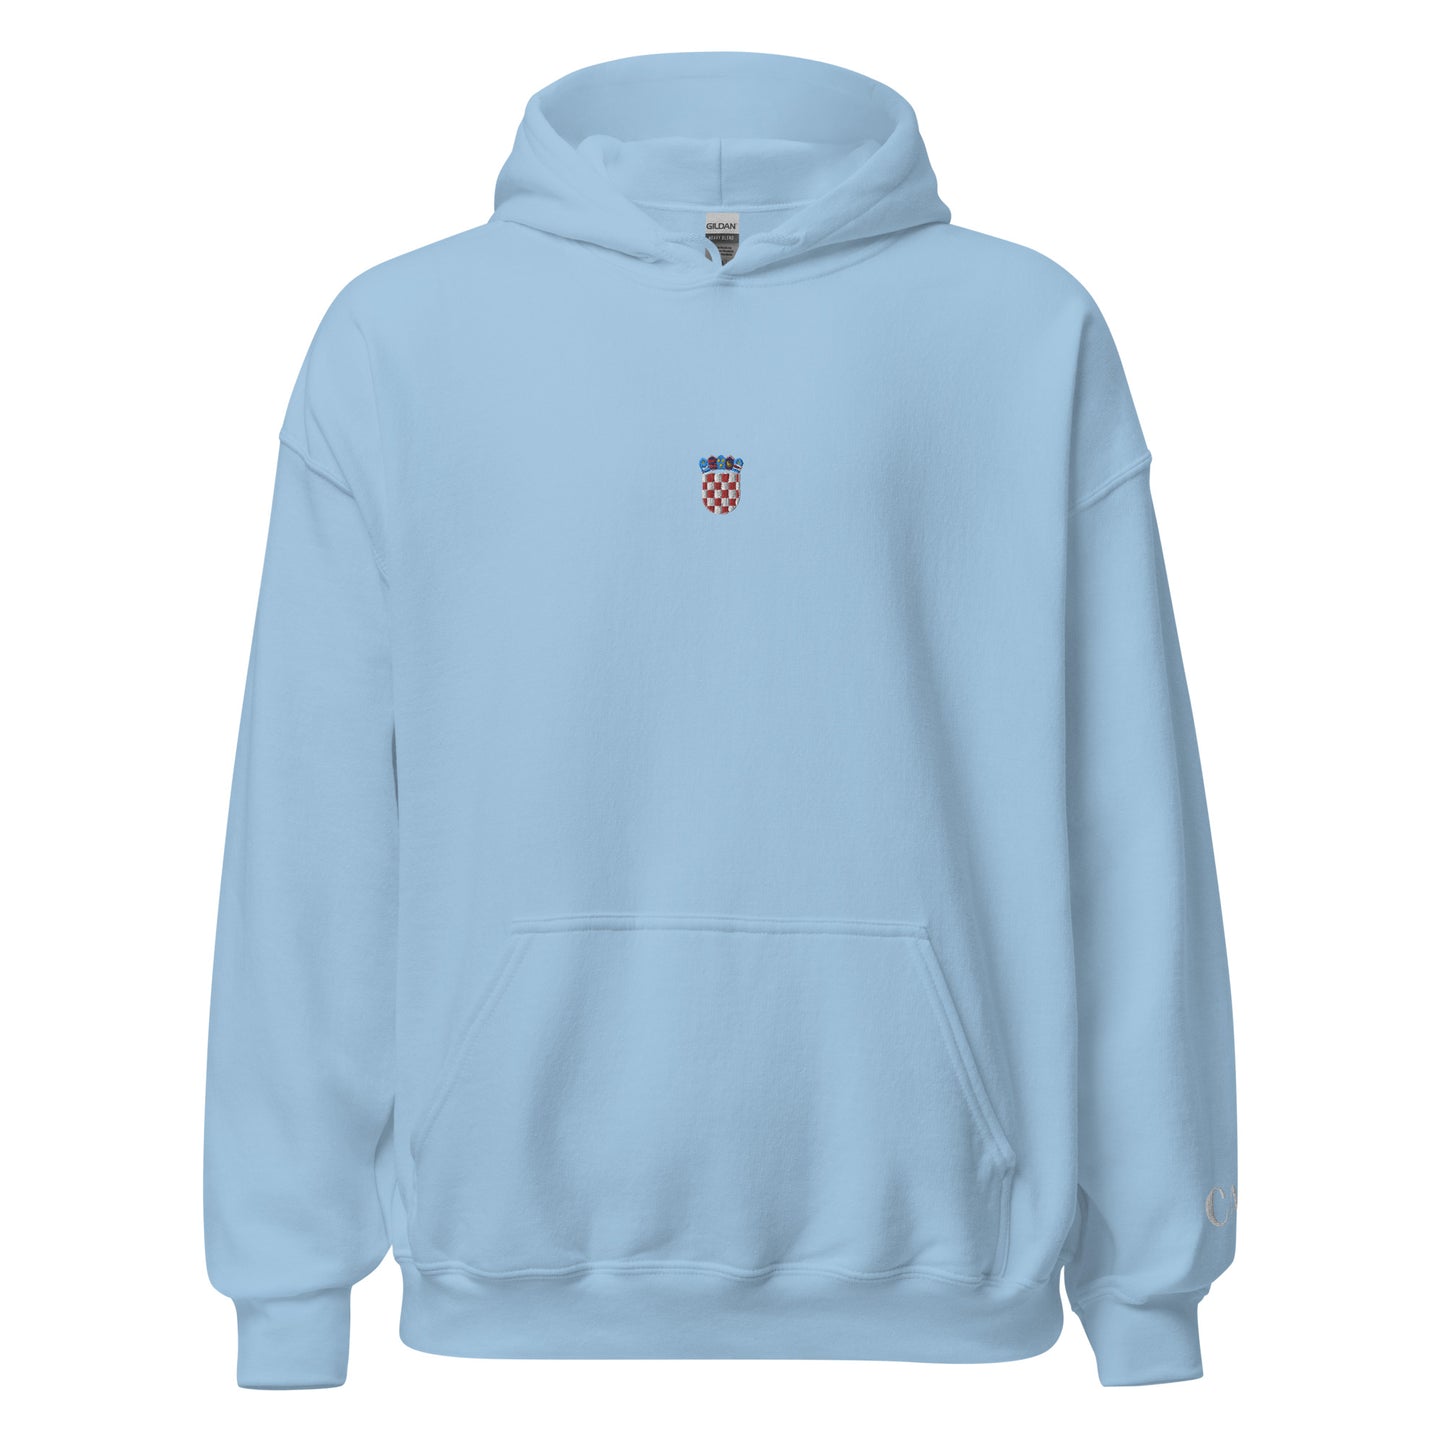 Essential Embroided Croatian Apparel Grb Unisex Hoodie